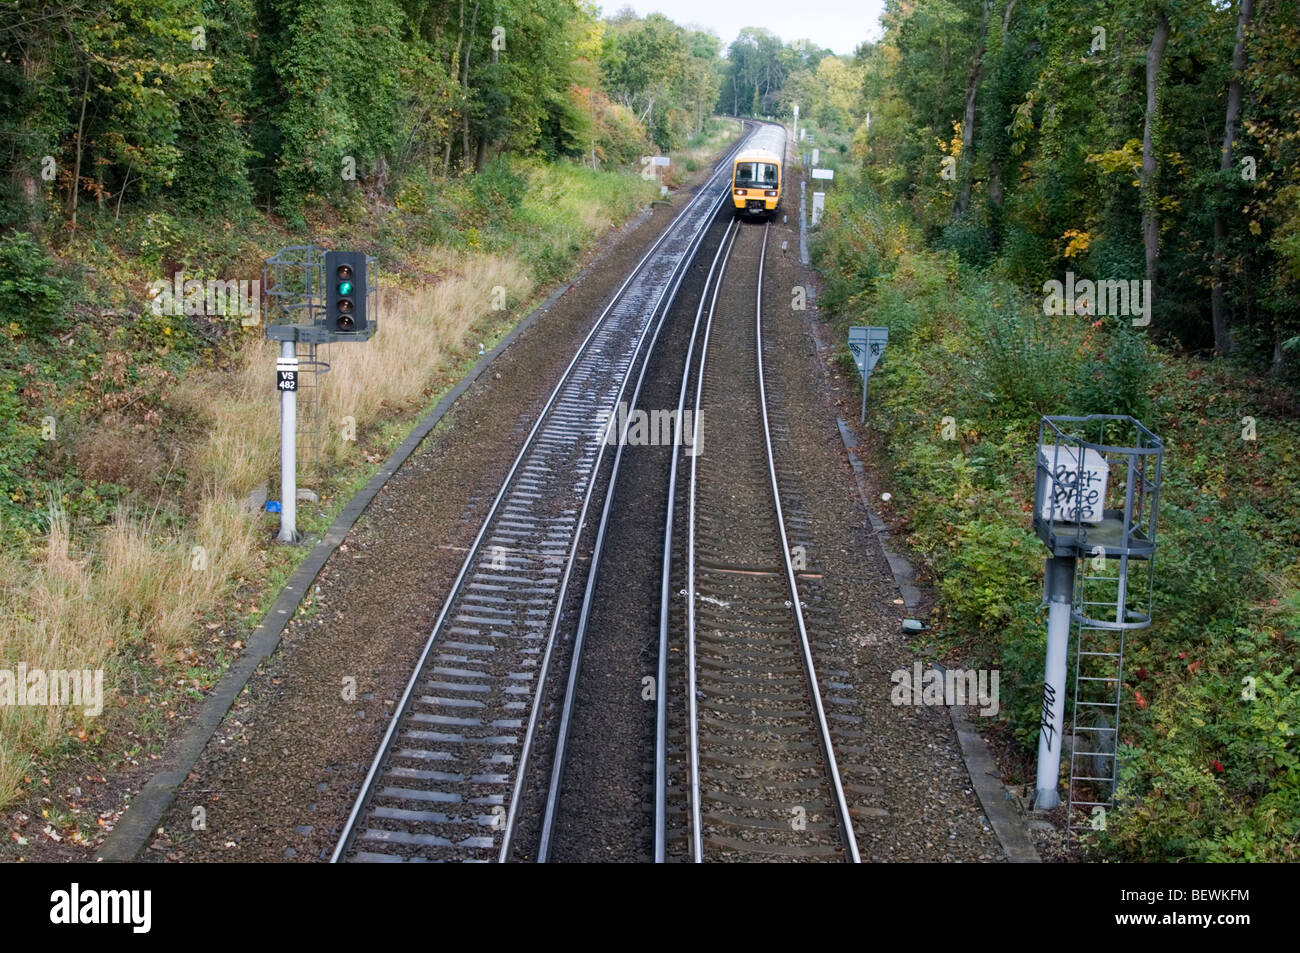 A London commuter train travelling through a wooded area Stock Photo